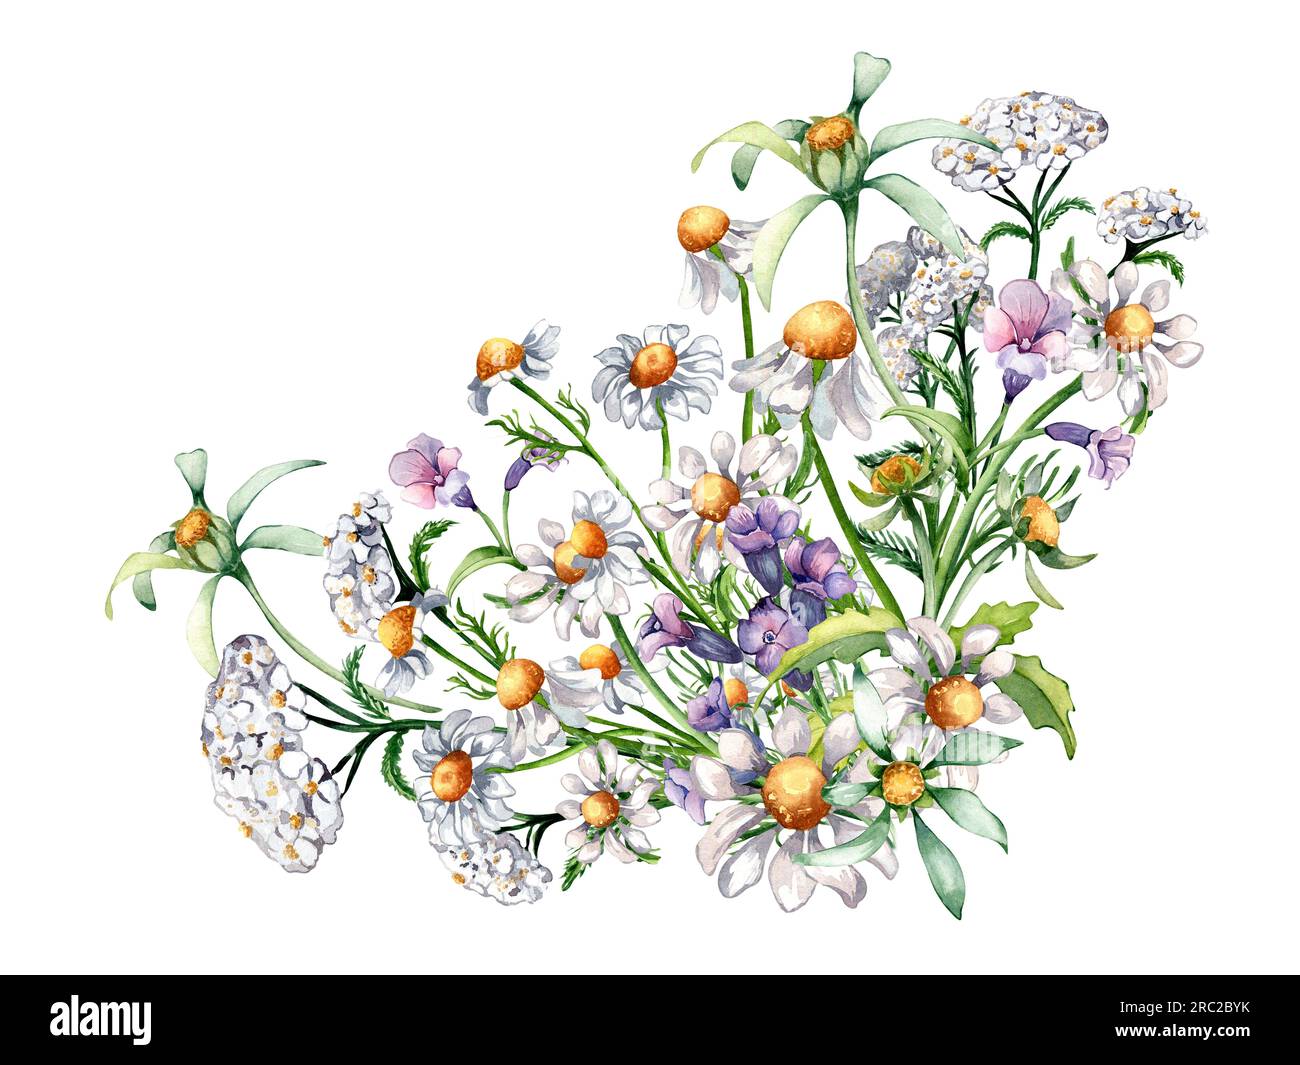 Composition of chamomile, yarrow, three lobe beggartick medicinal plants watercolor illustration isolated on white. Purple, yellow flower hand drawn. Stock Photo